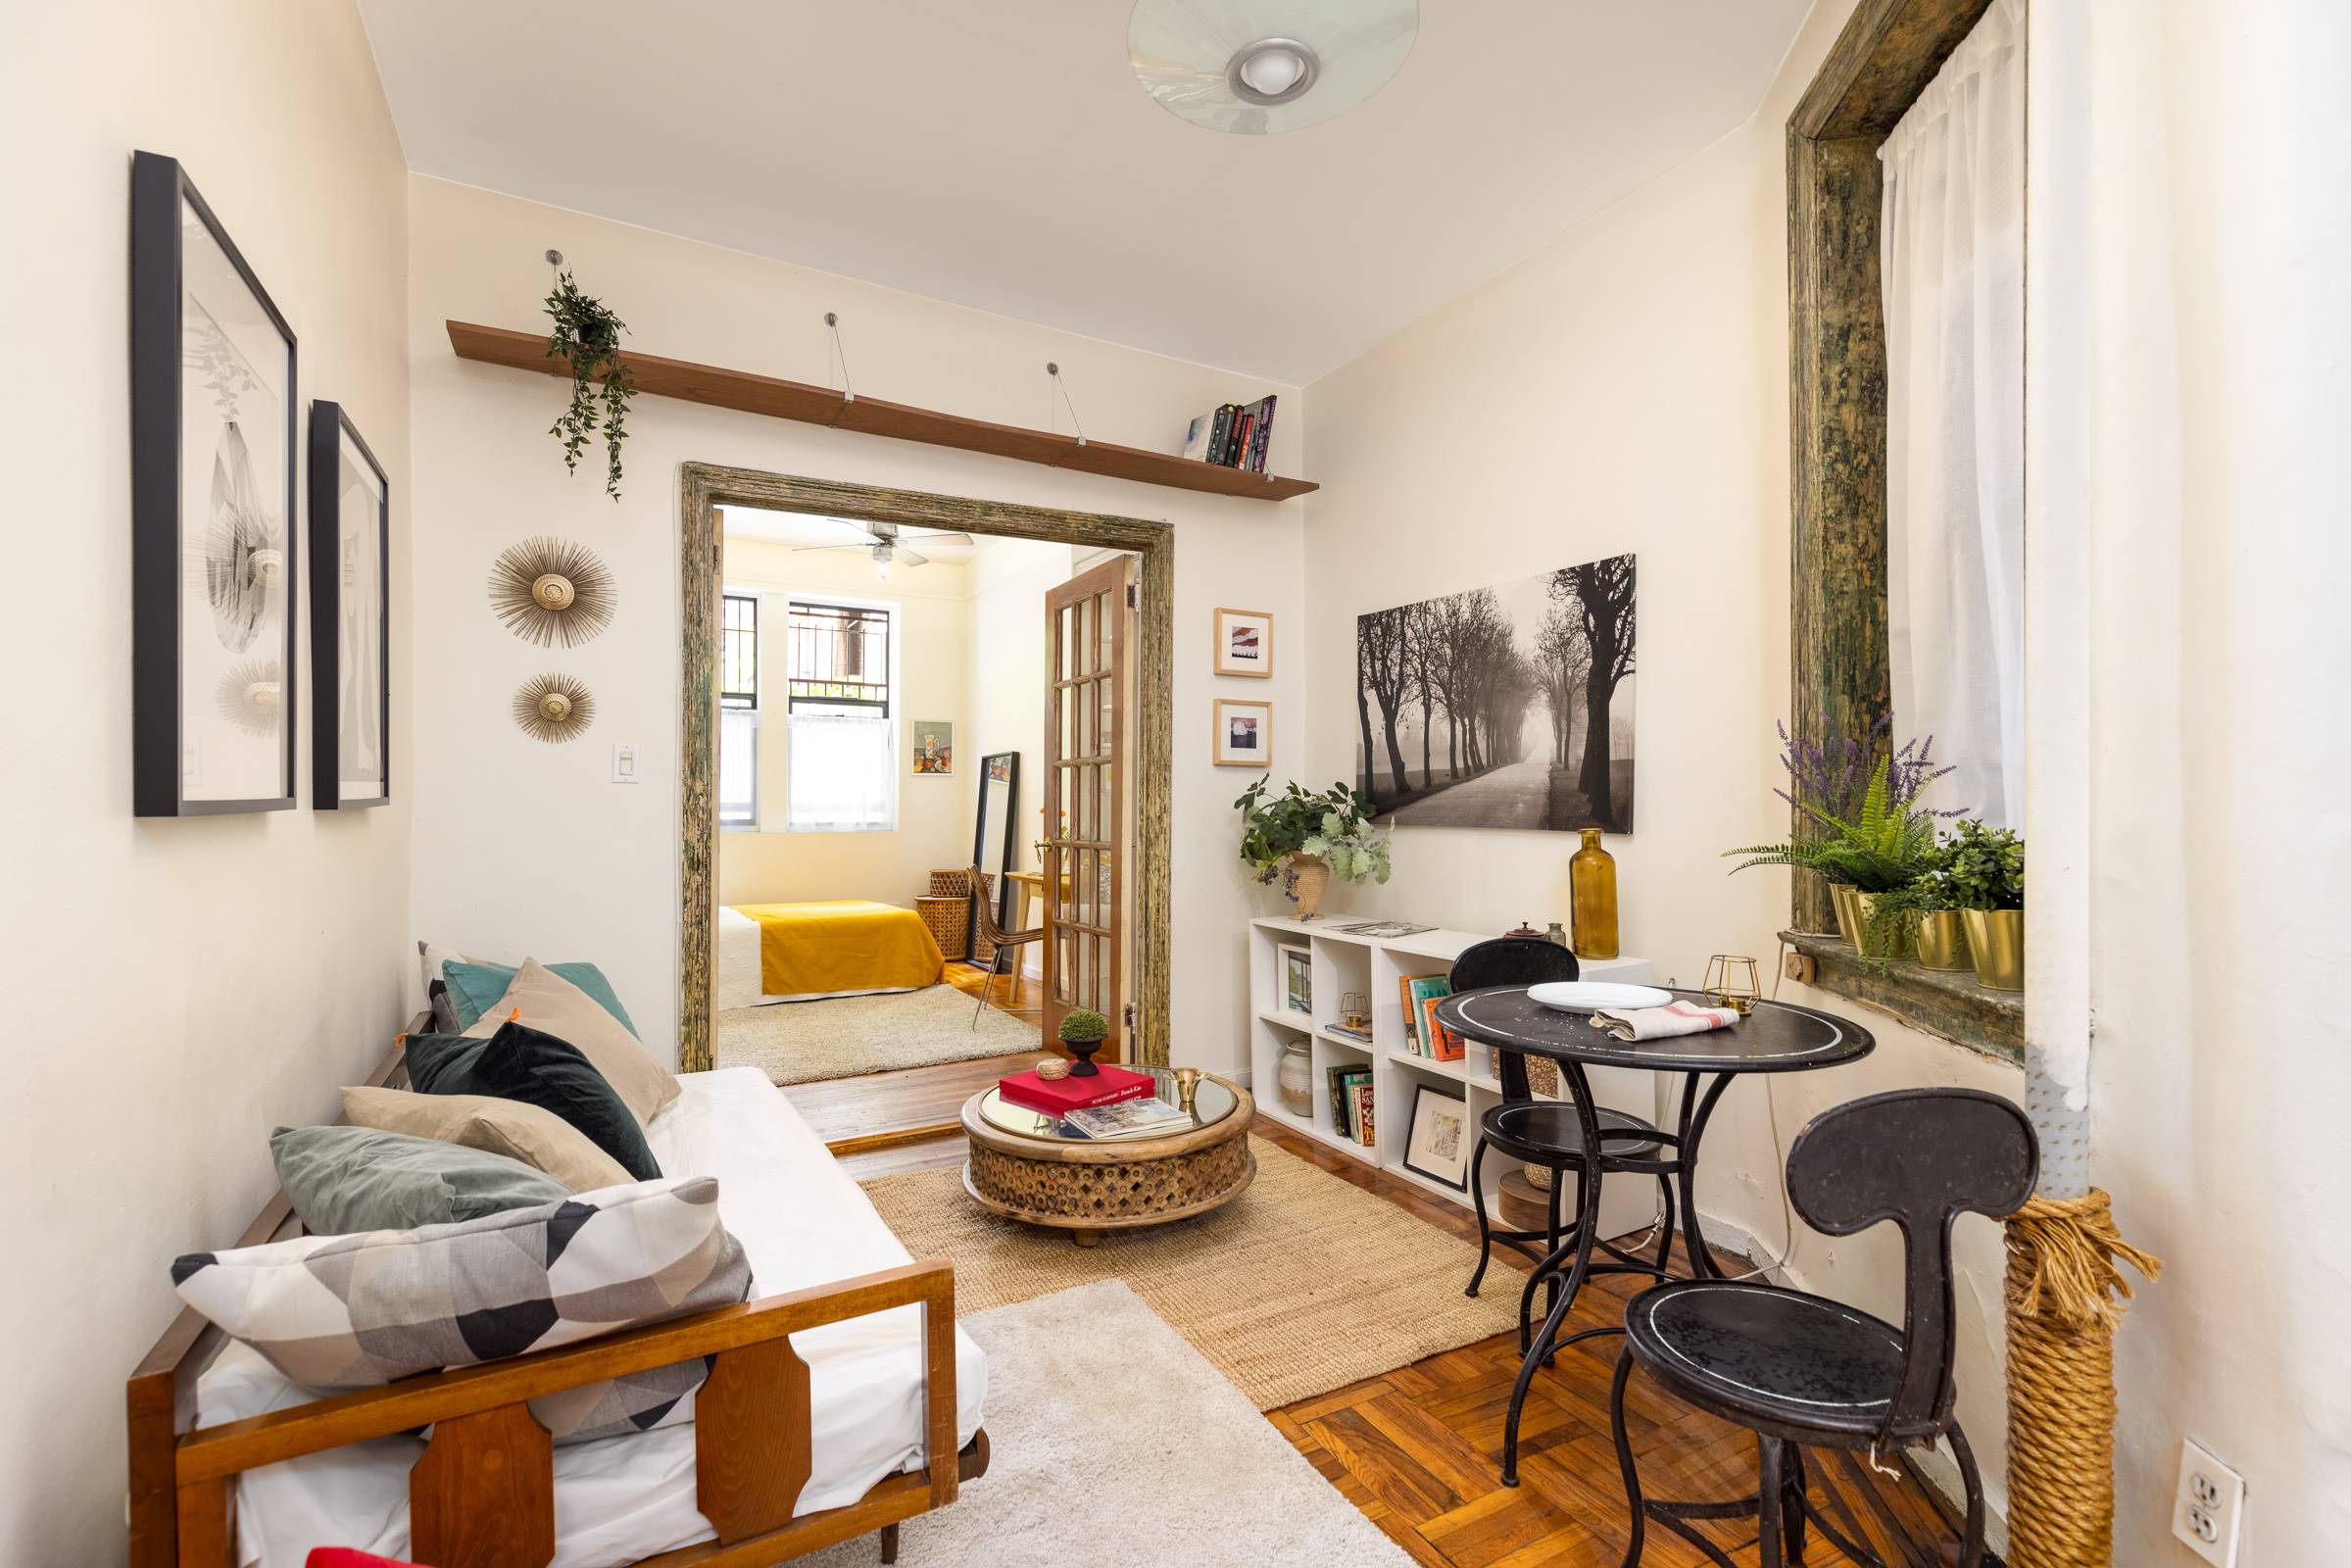 Ideally positioned in the heart of the Lower East Side, this charming, one bedroom coop is located on the first floor of the building and features patinated doorways and windows, ...